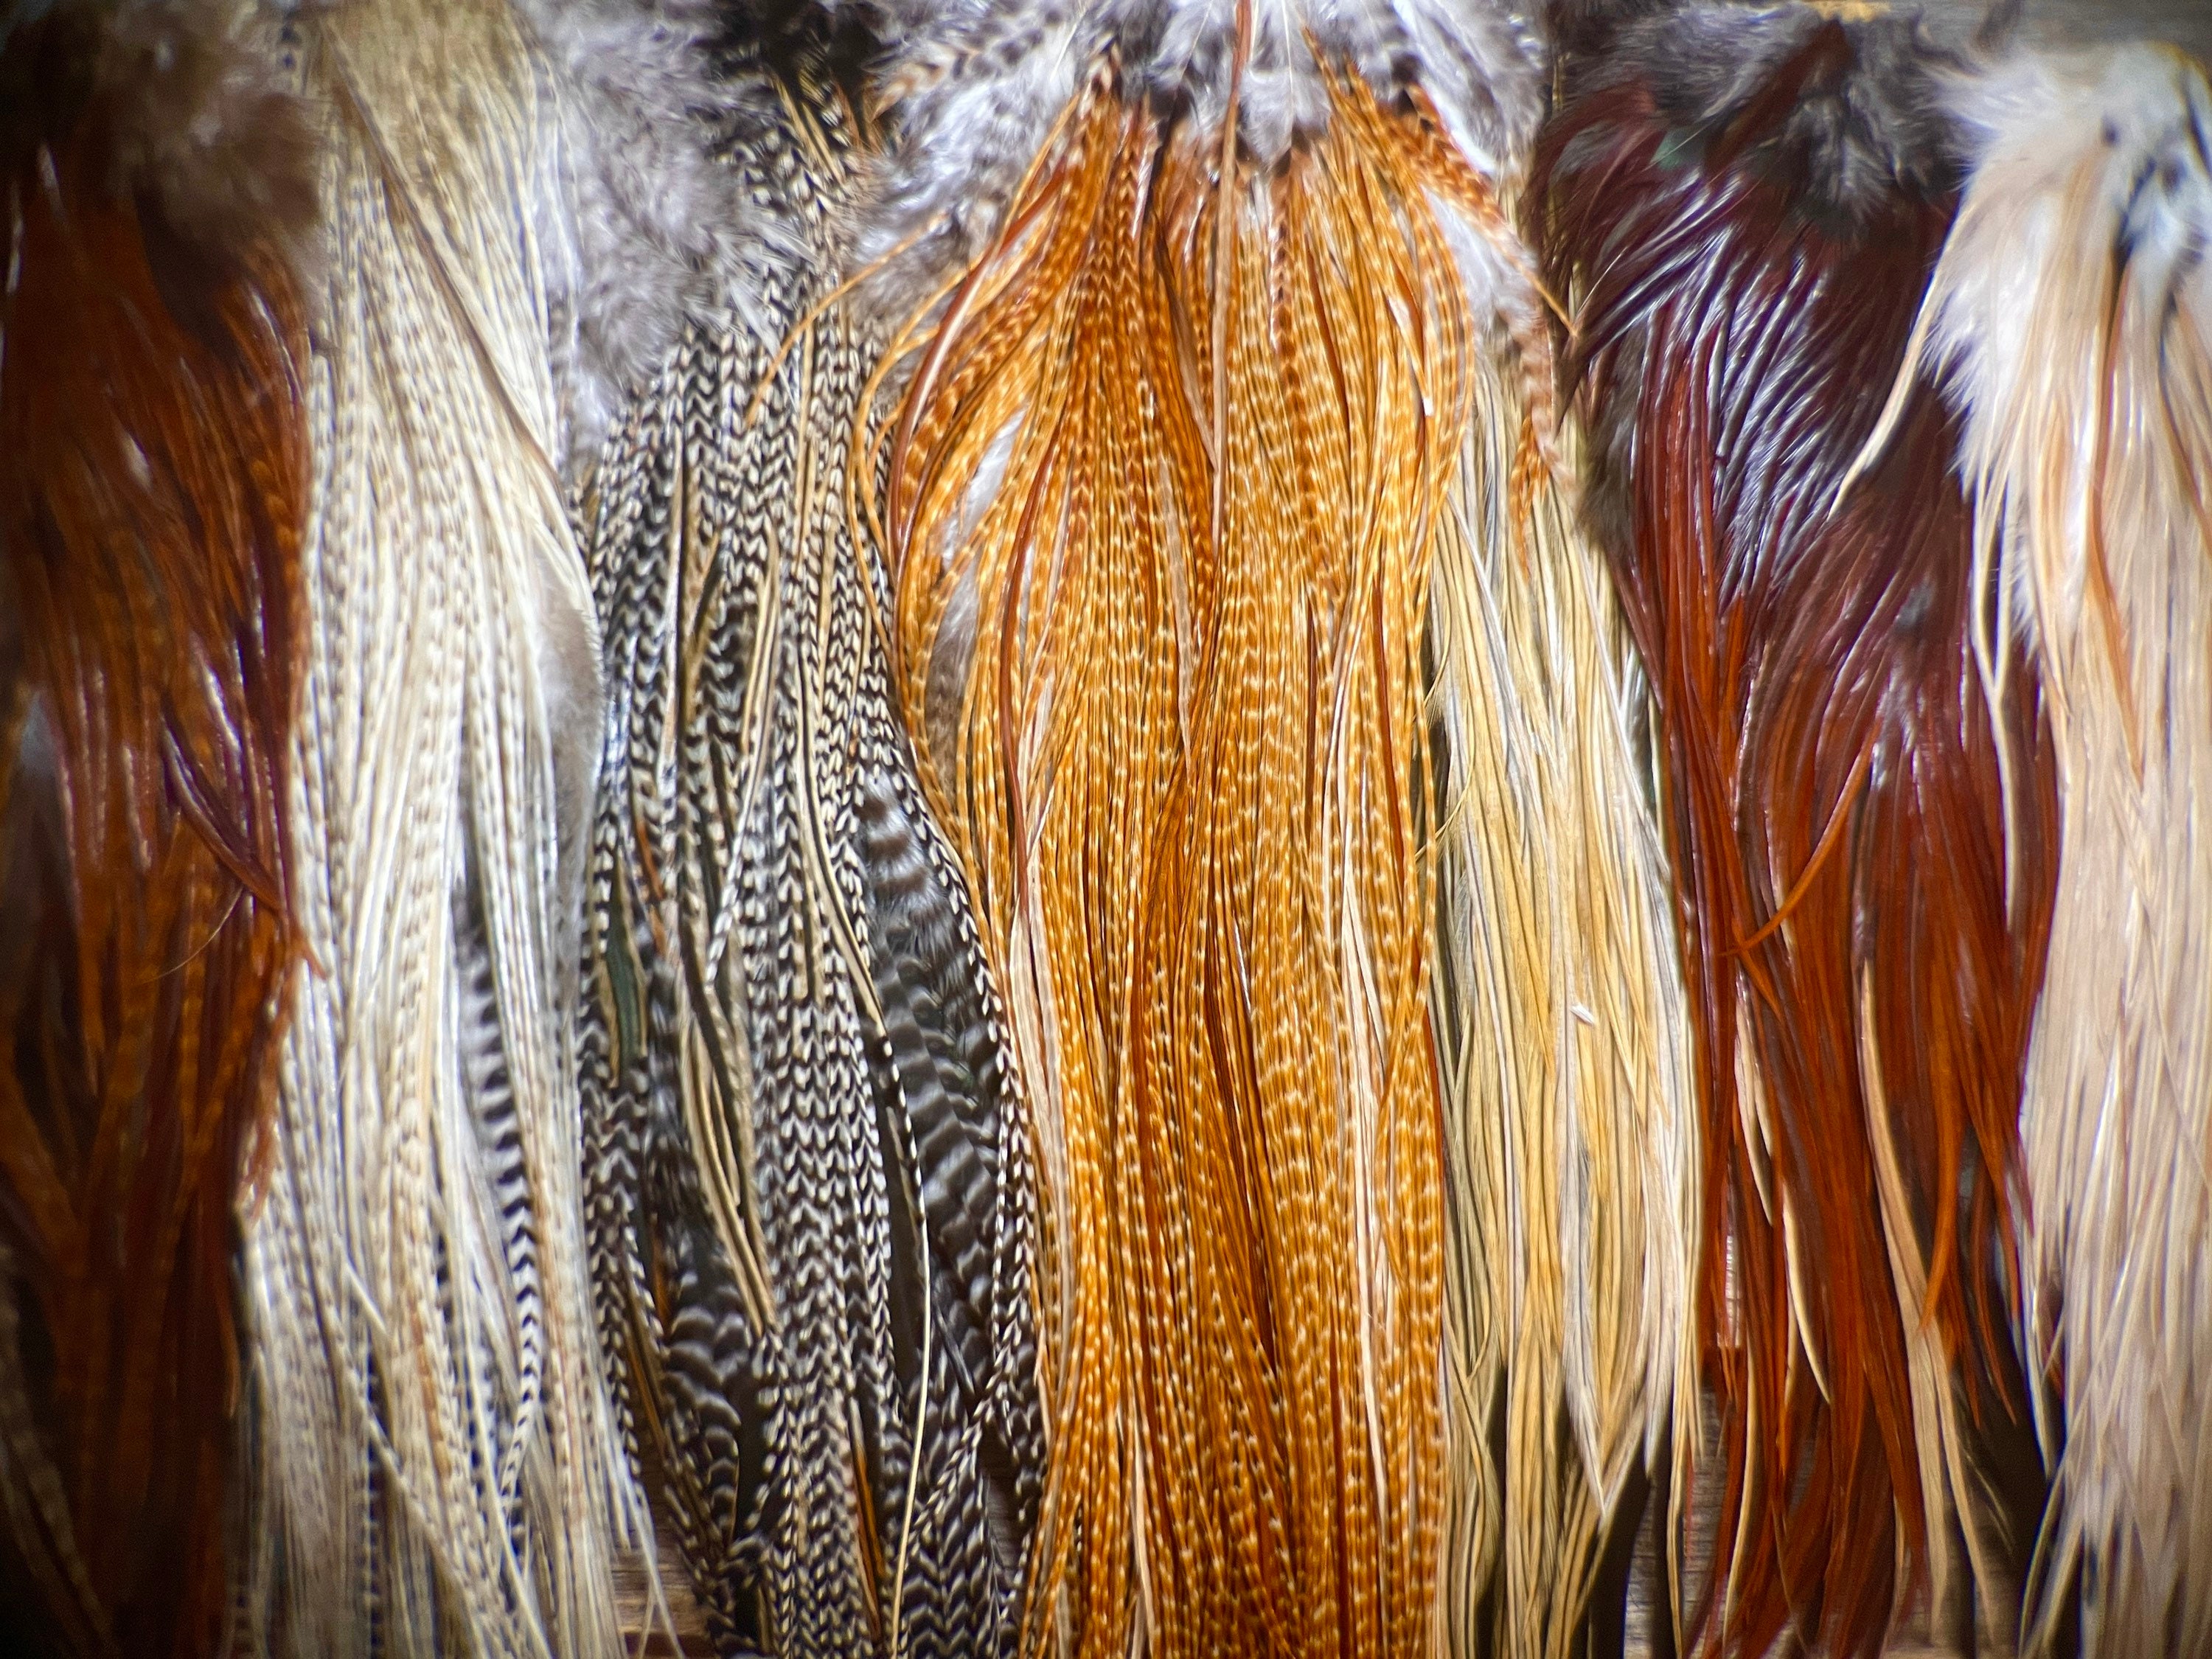 Small Natural Red Tip Golden Pheasant Feathers, 2-3 Inches 5-7 Cm